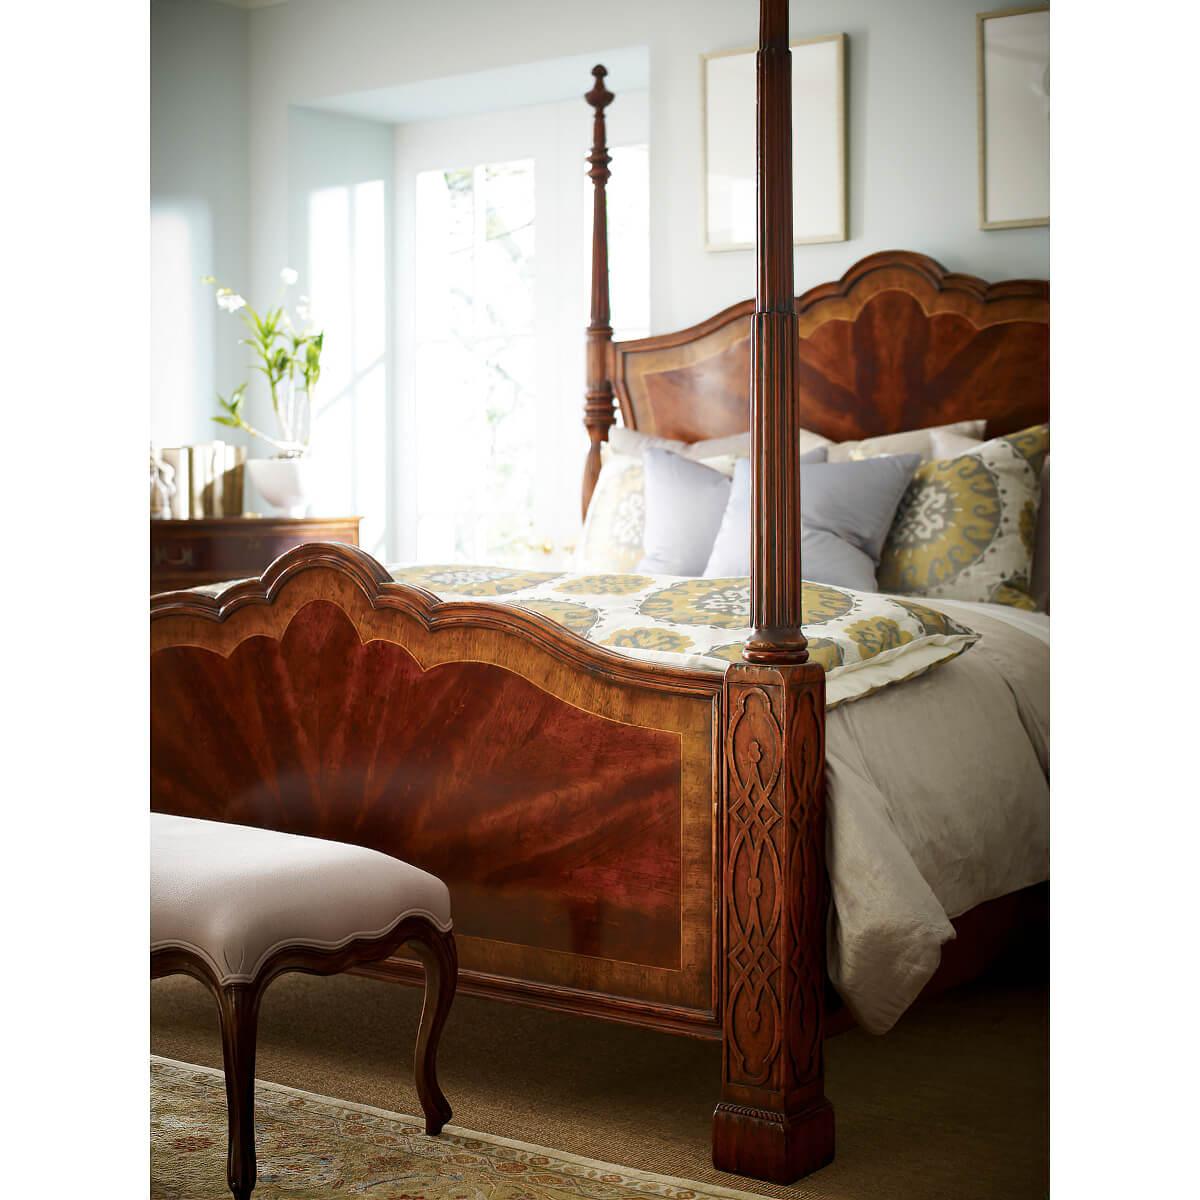 chippendale bedroom furniture